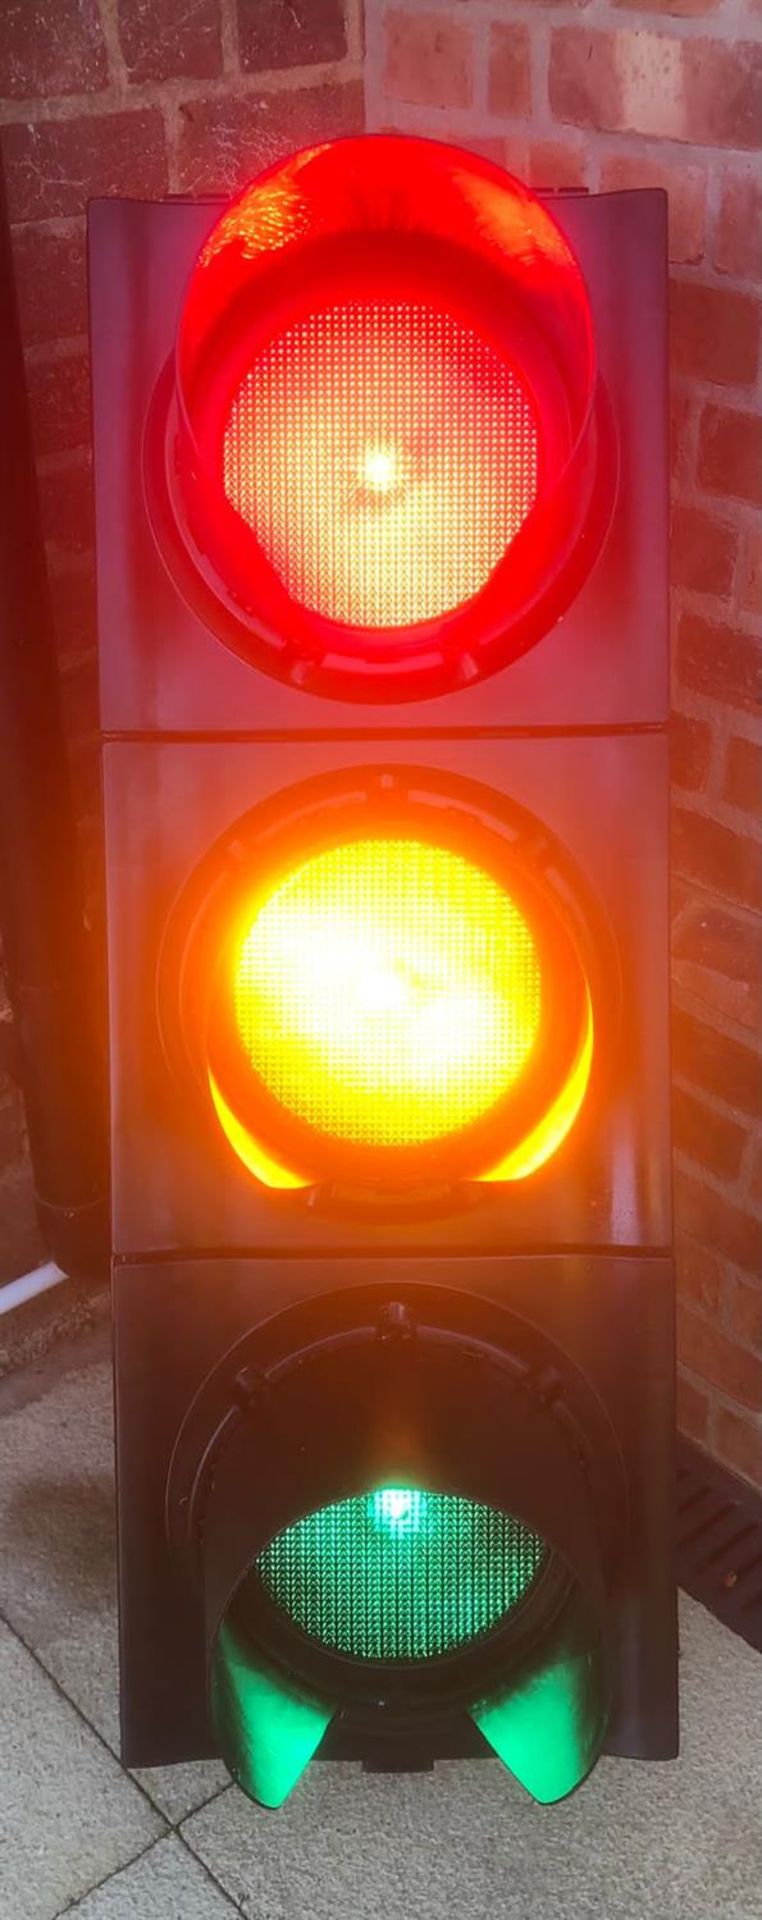 Traffic Lights with Remote Control - Image 5 of 8